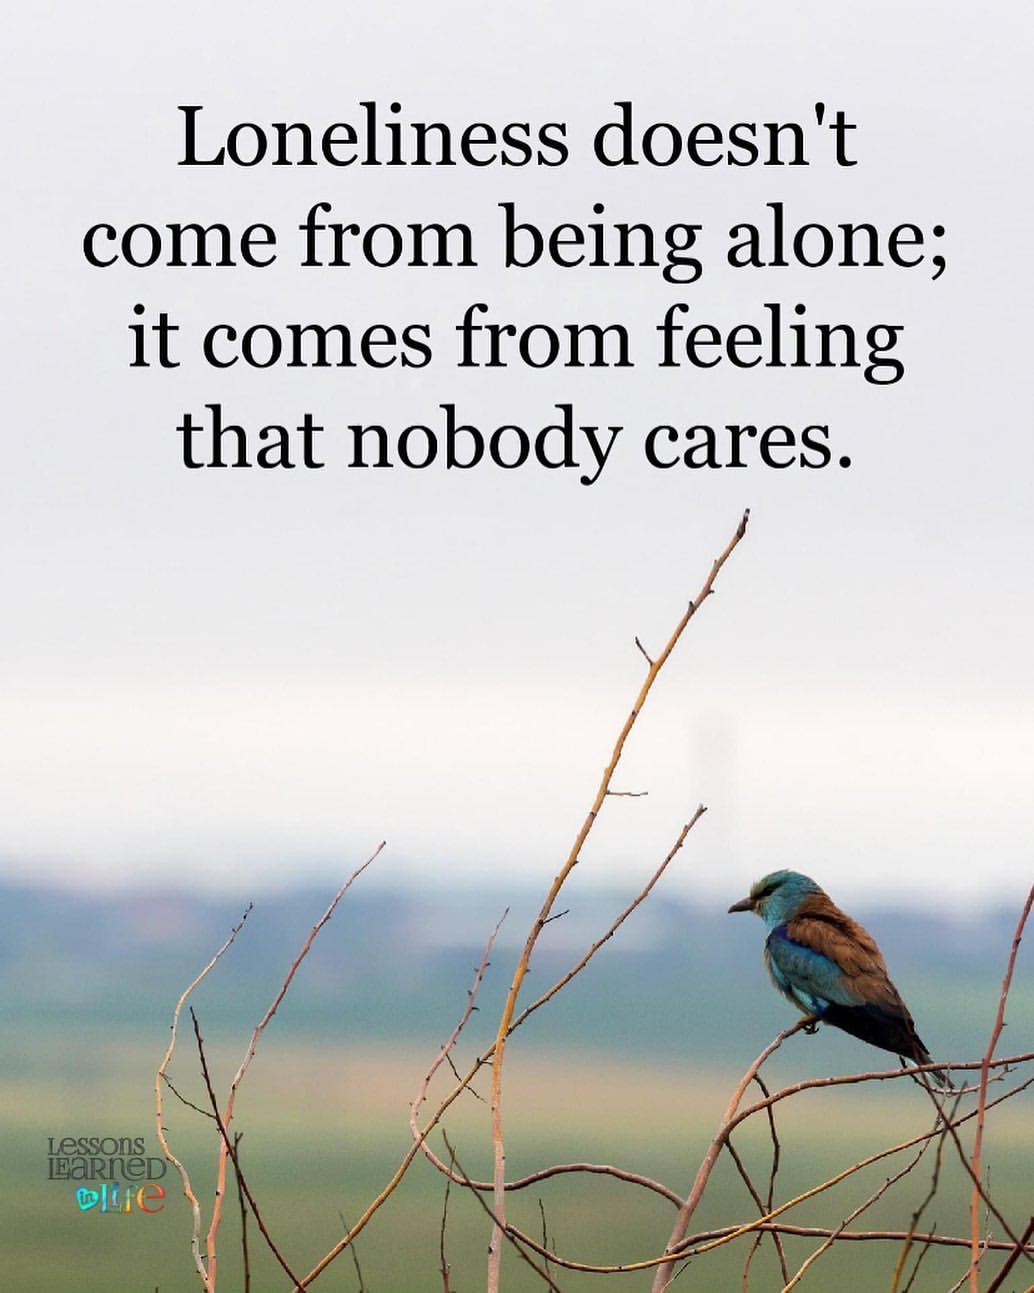 Loneliness is not being alone. It's the feeling that nobody cares, by  Menno van der Land